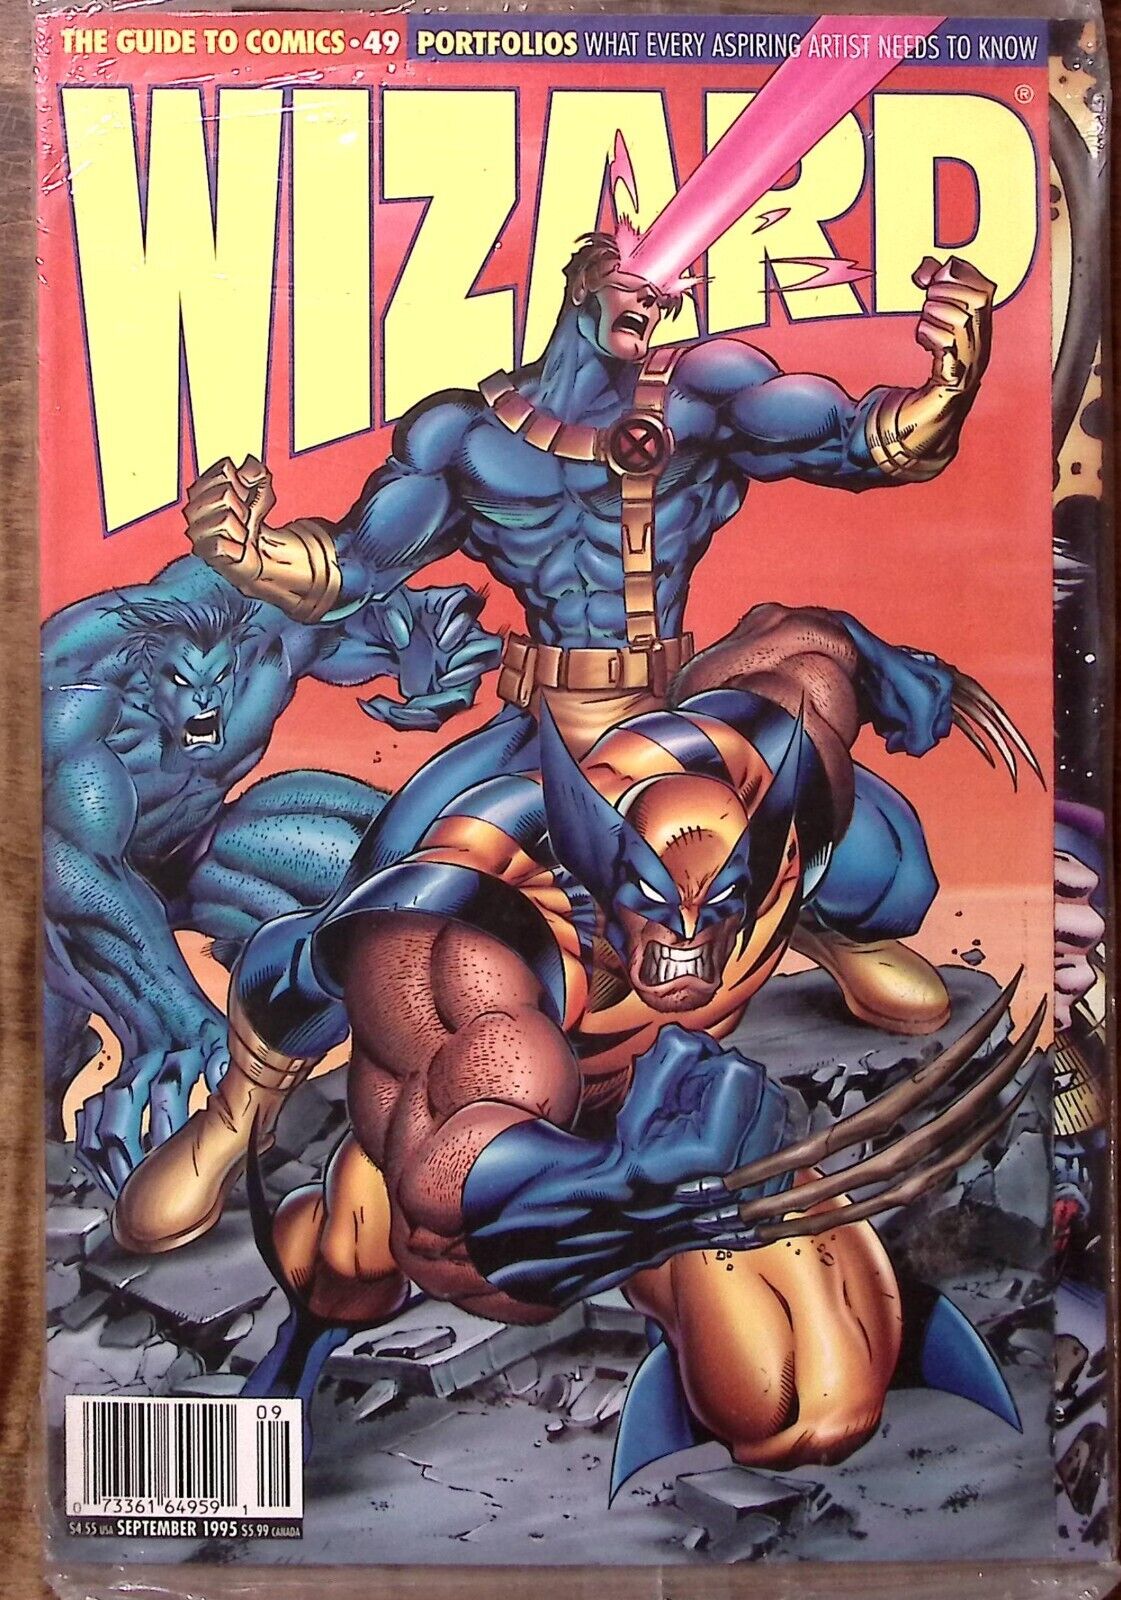 1995 WIZARD GUIDE TO COMICS #49 SEPT WOLVERINE CYCLOPS   STILL SEALED  Z5064